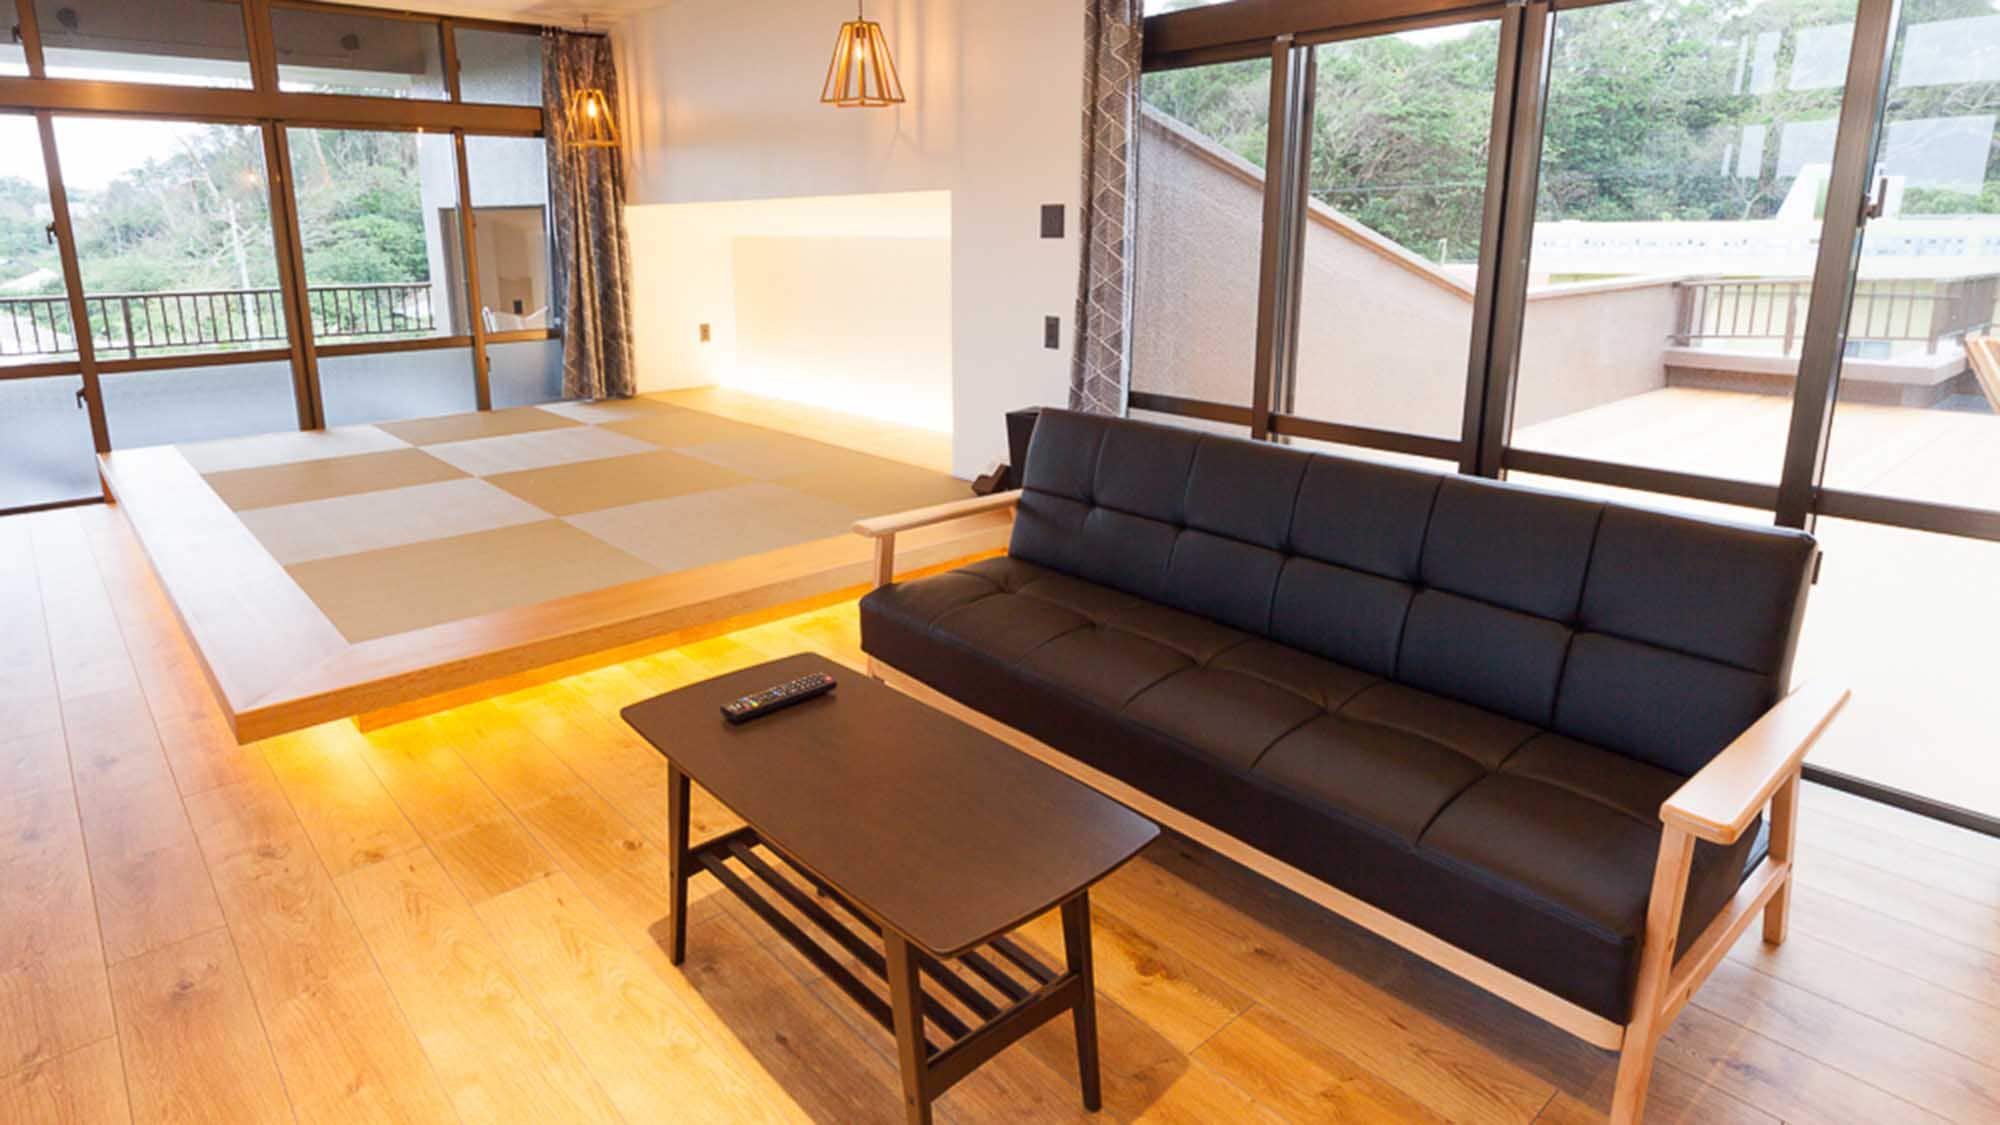 ・ In addition to the sofa, a slightly raised tatami space is also available in the room.